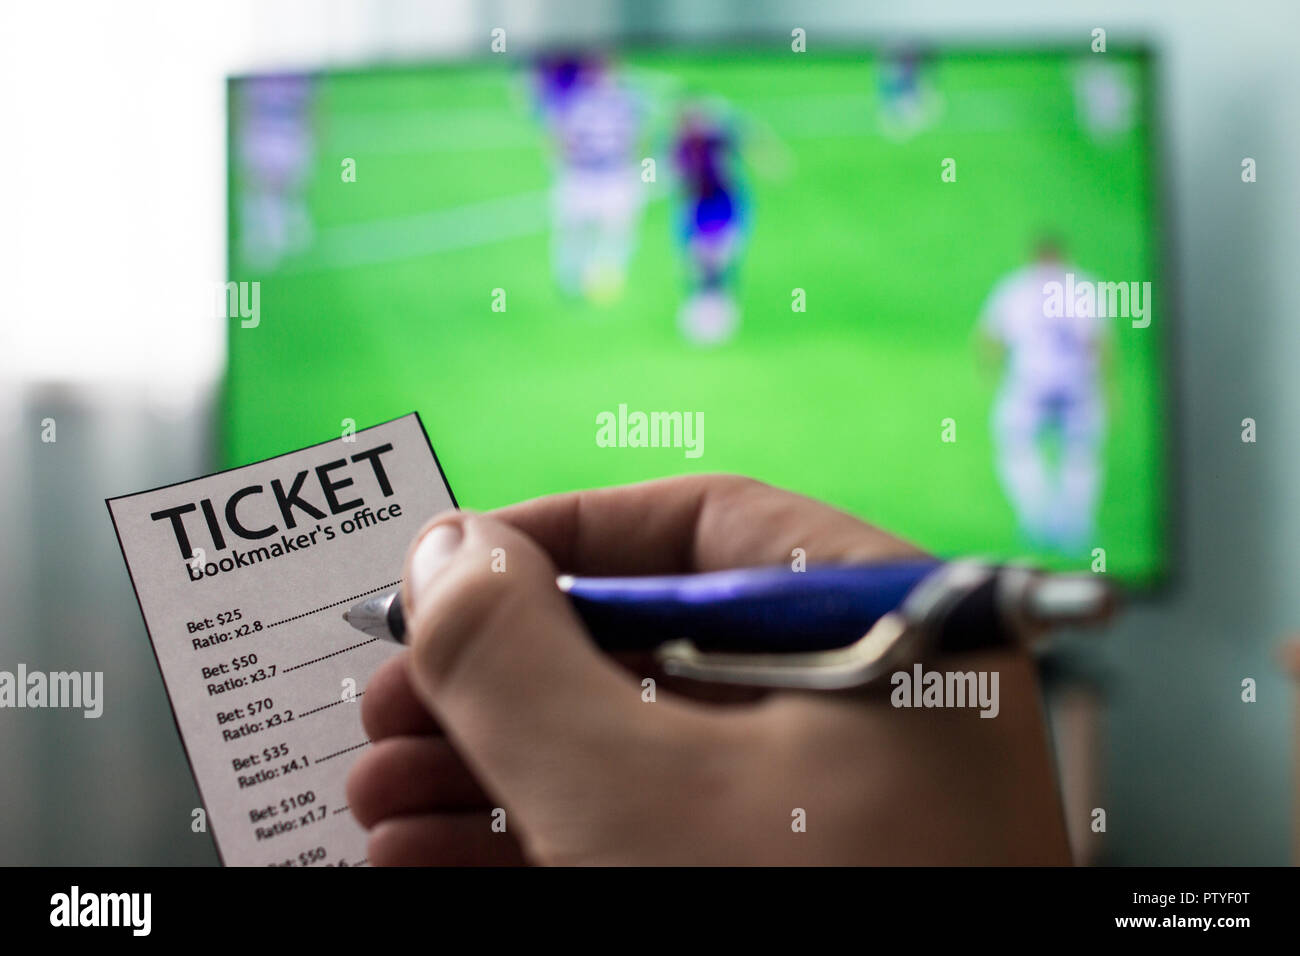 Men's hands with a ticket bookmaker's office, on TV show football, Champions League, sports betting, close-ups Stock Photo